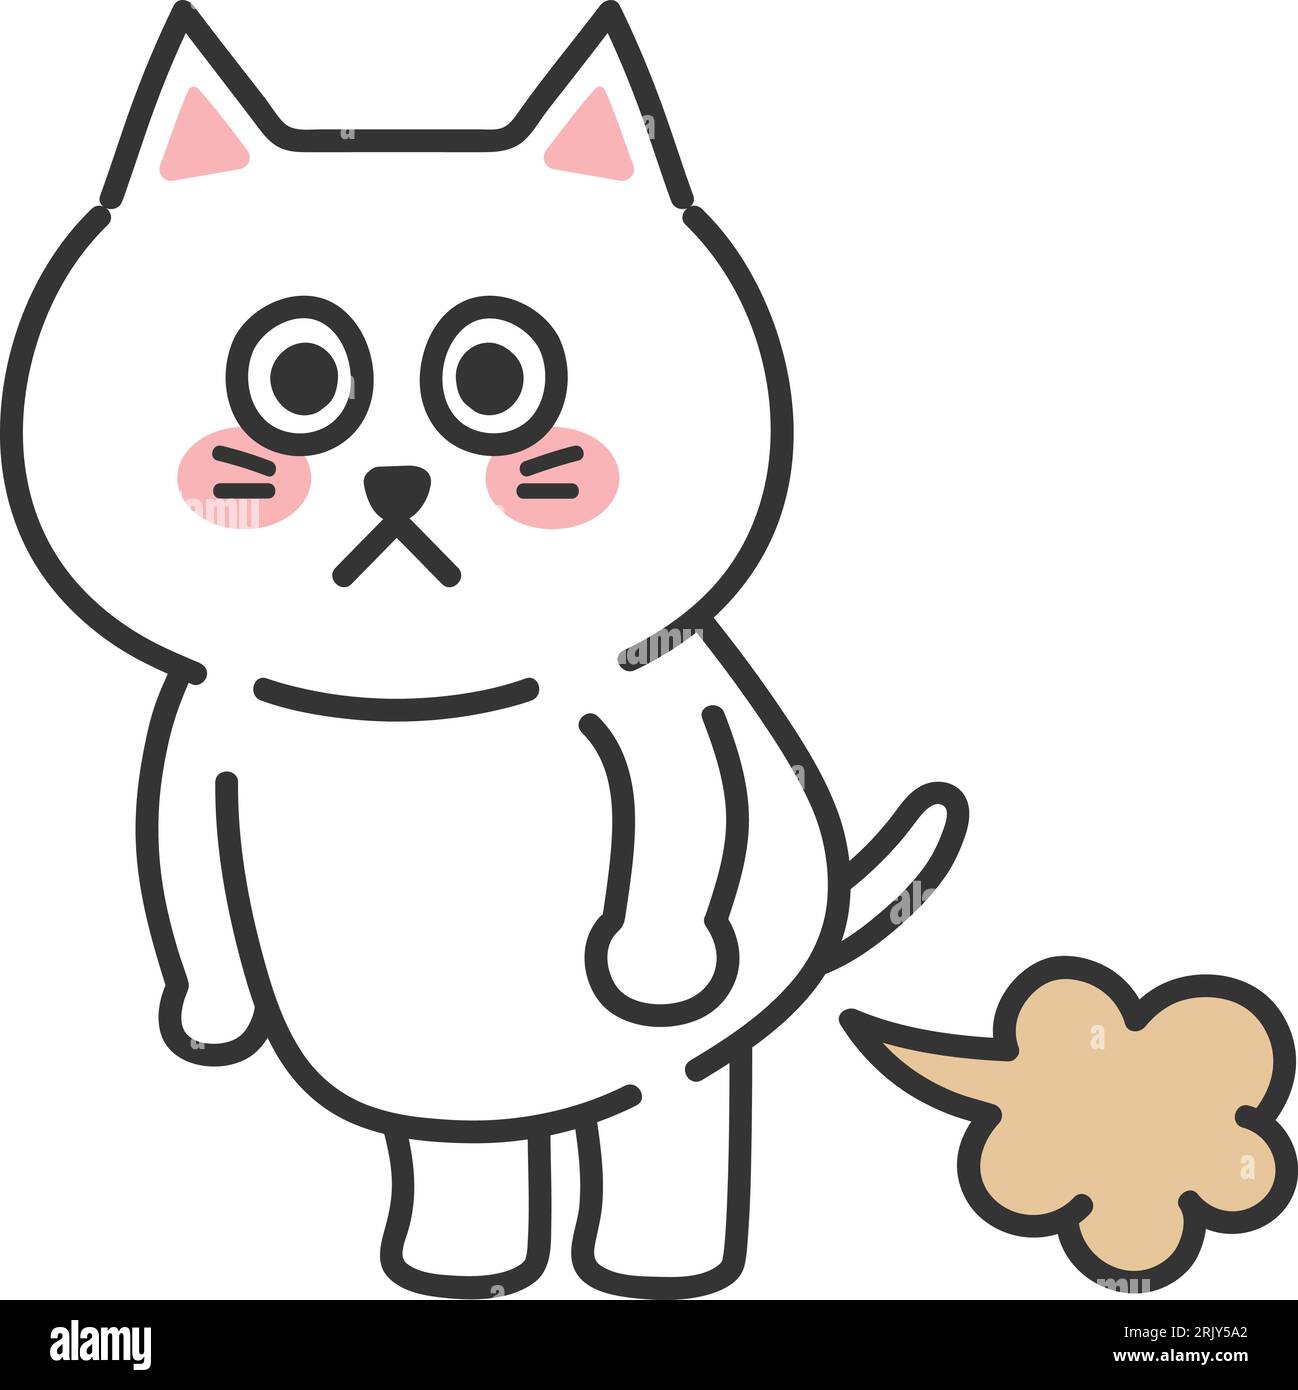 White cartoon cat pooted loudly, vector illustration. Stock Vector